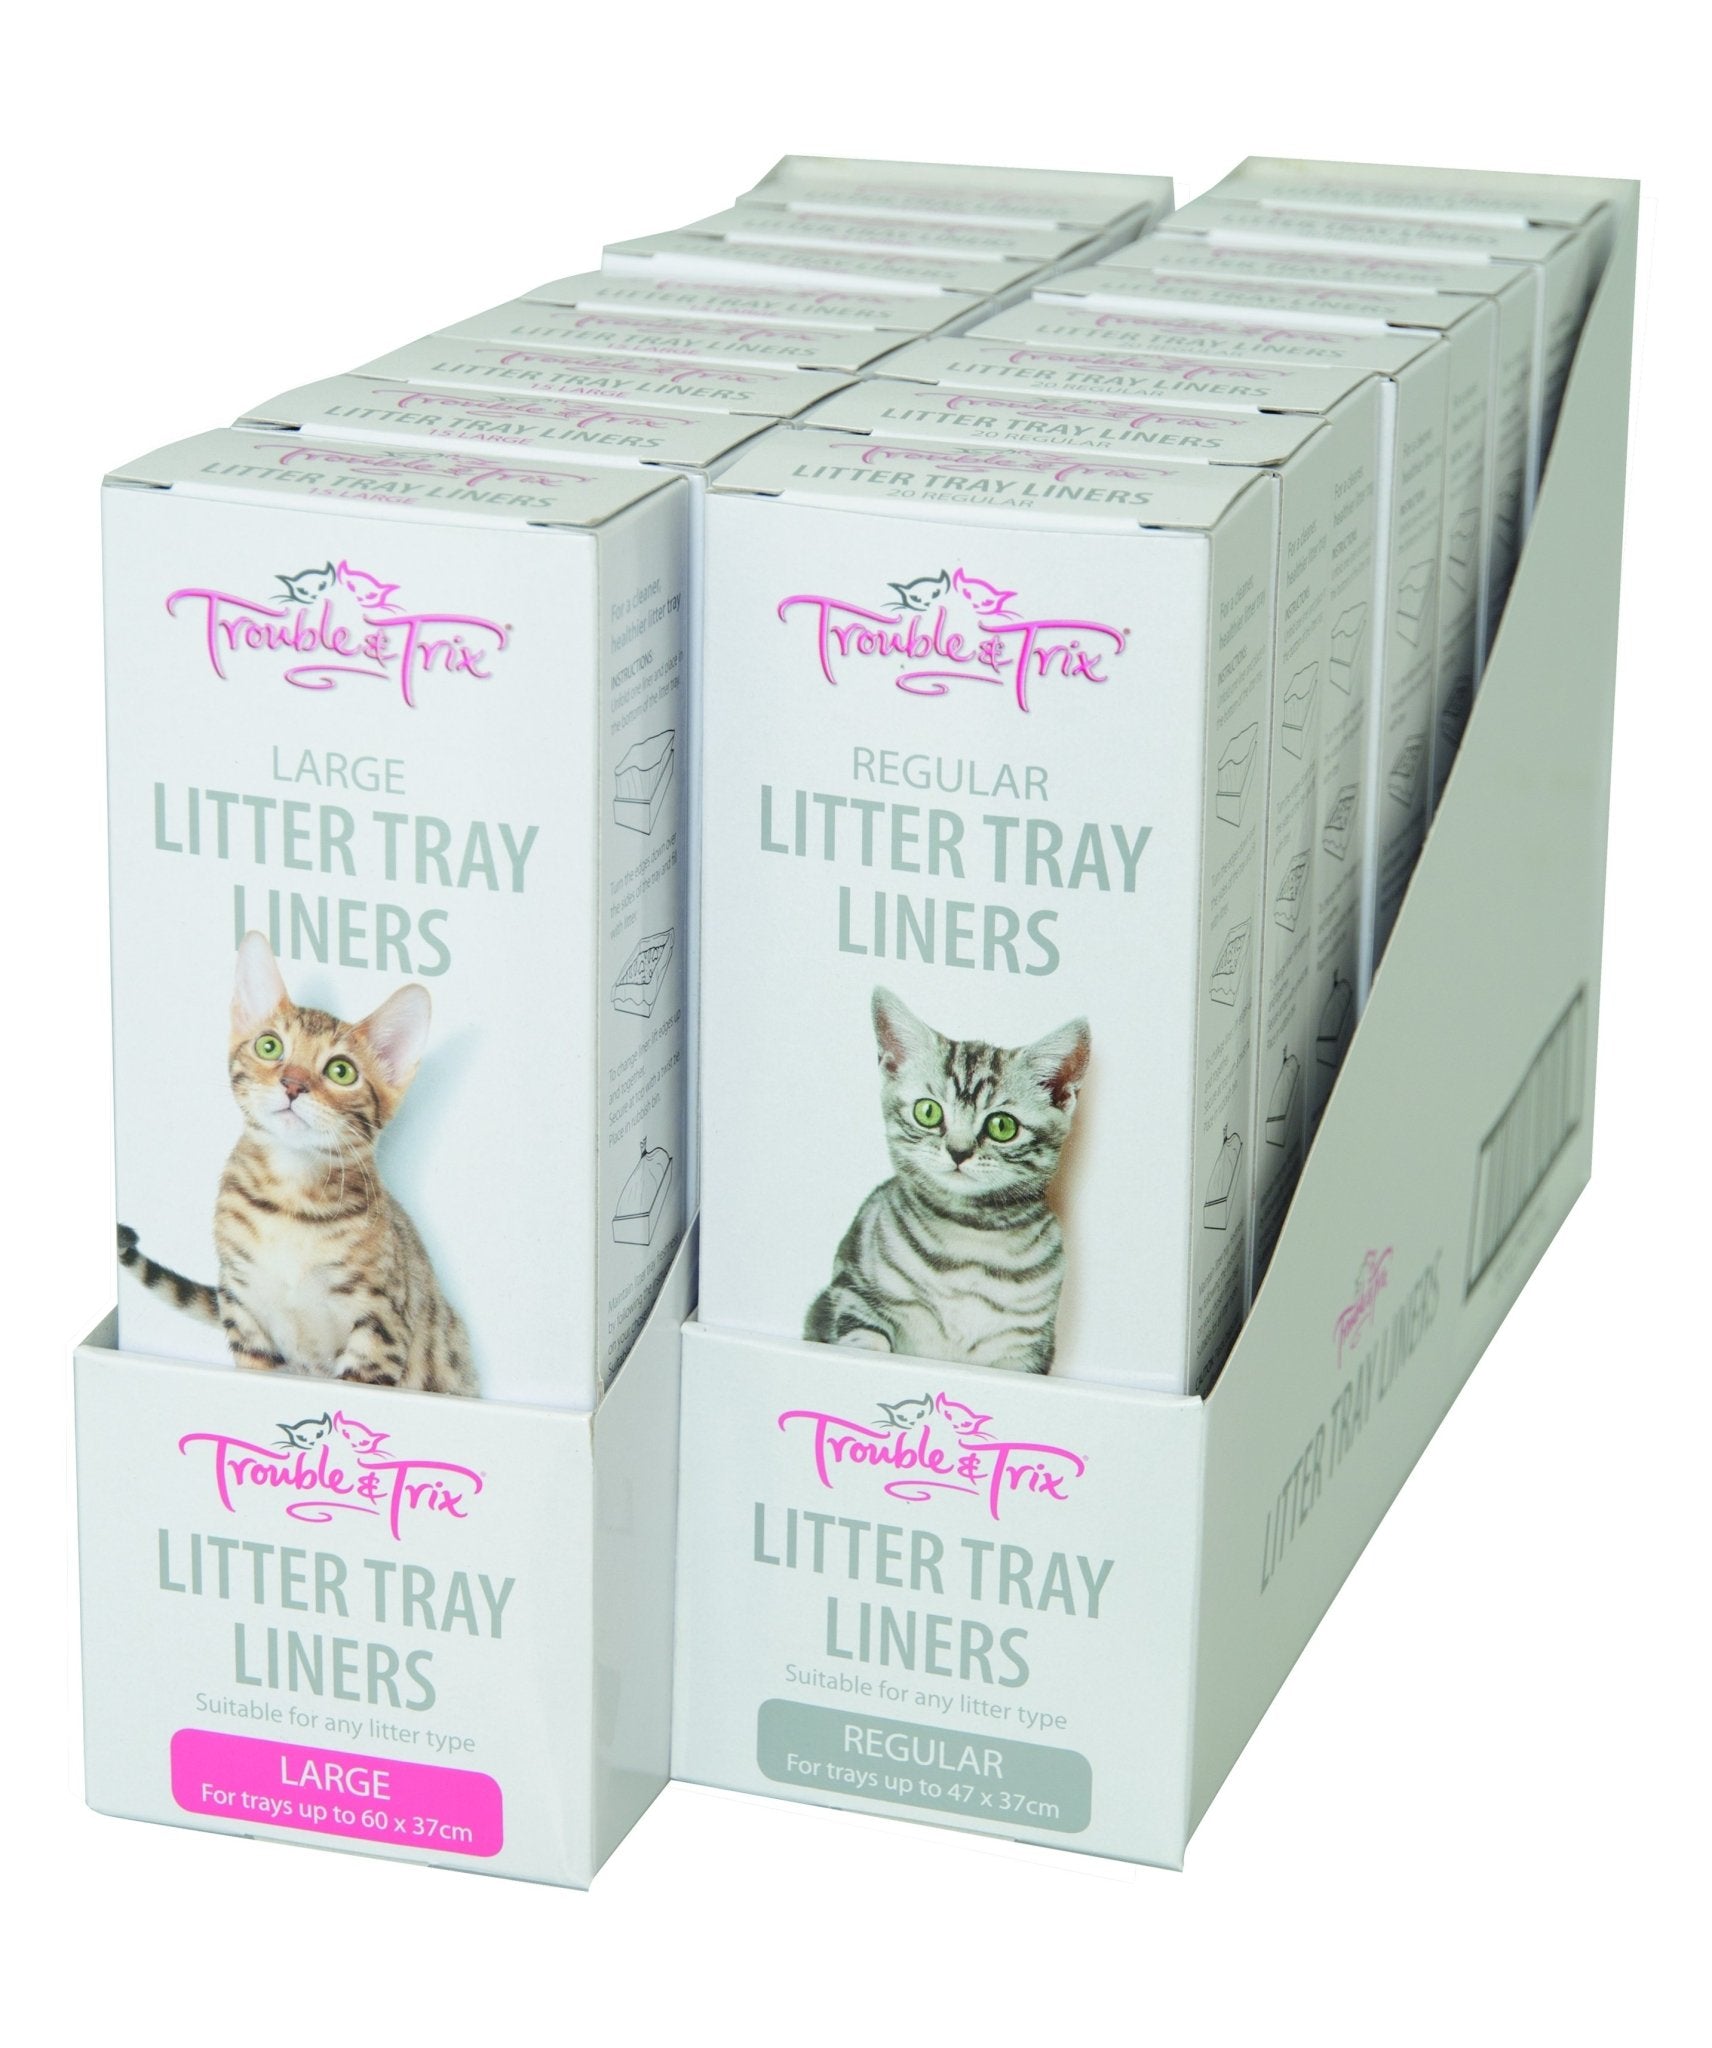 Trouble & Trix Litter Tray Liners Regular 20 pack - Woonona Petfood & Produce